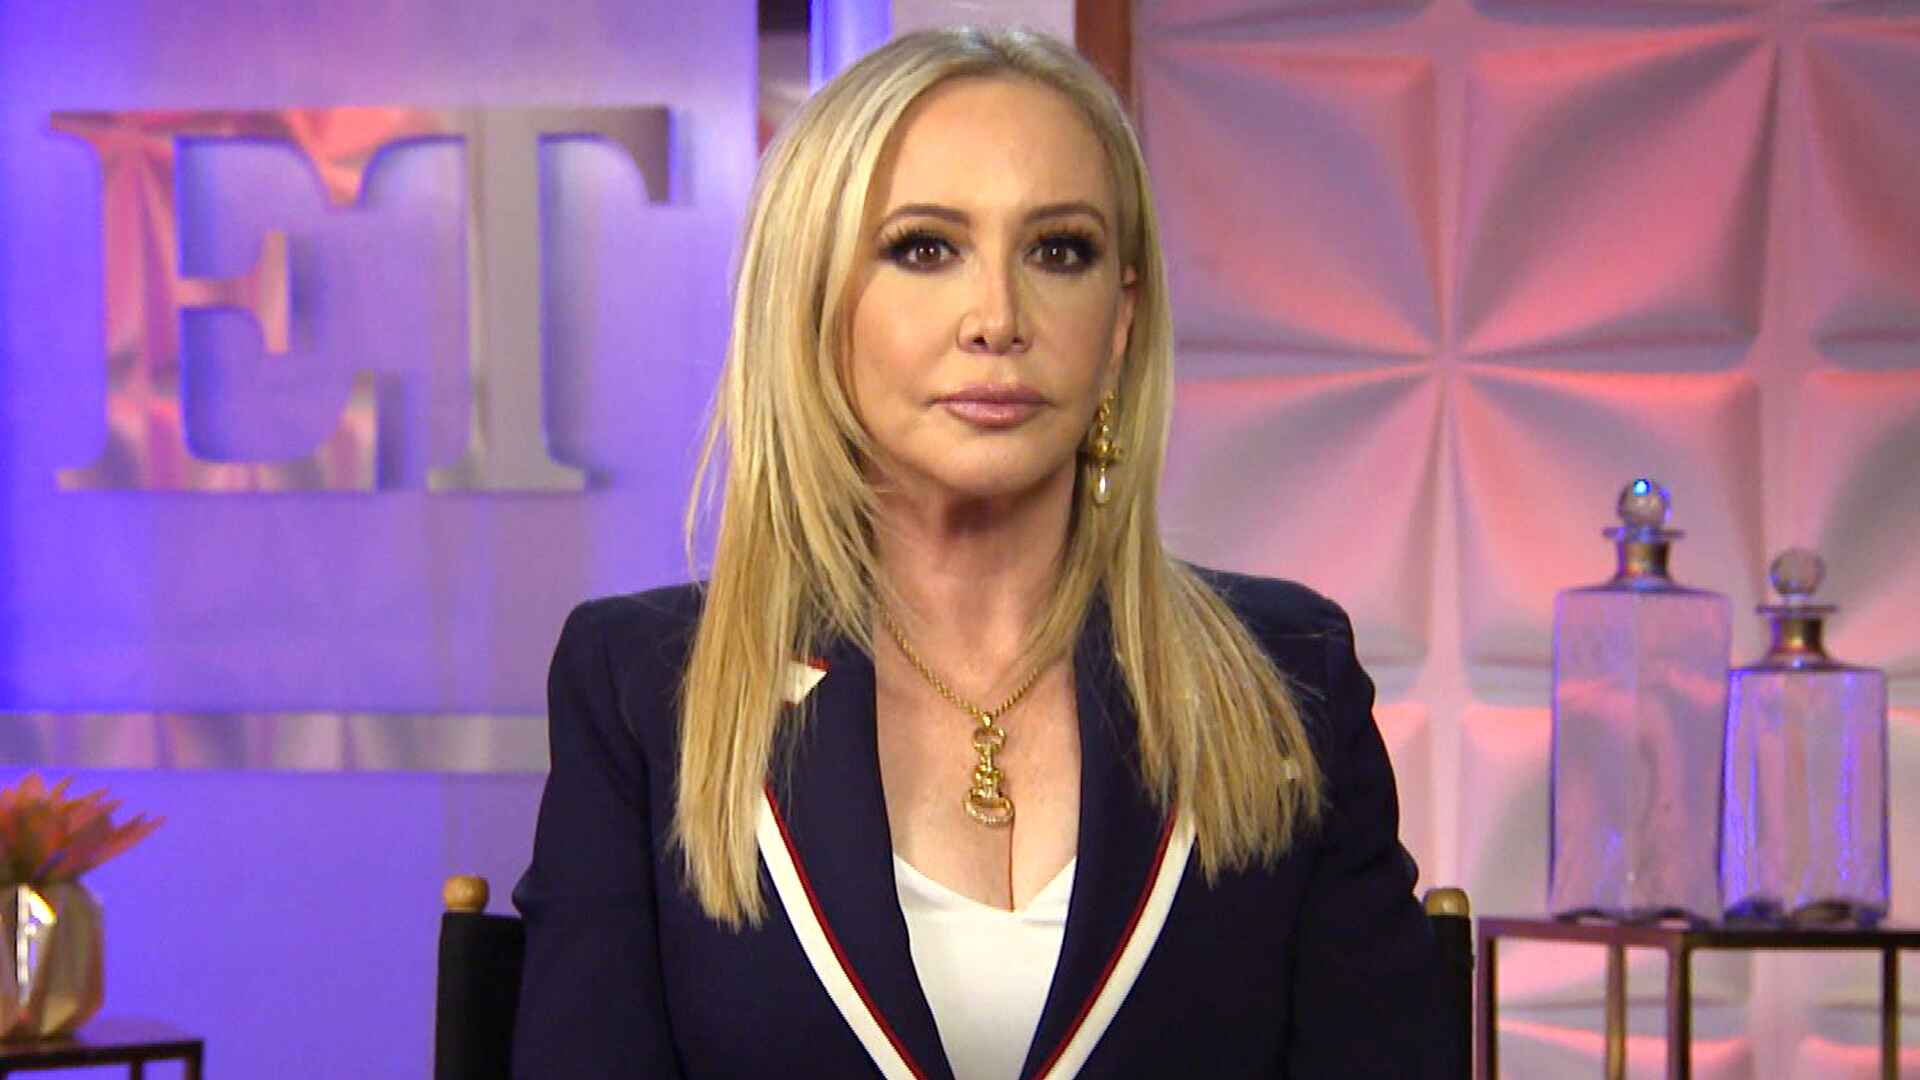 Shannon Beador Takes Responsibility And Offers To Pay For Damaged Property Following DUI